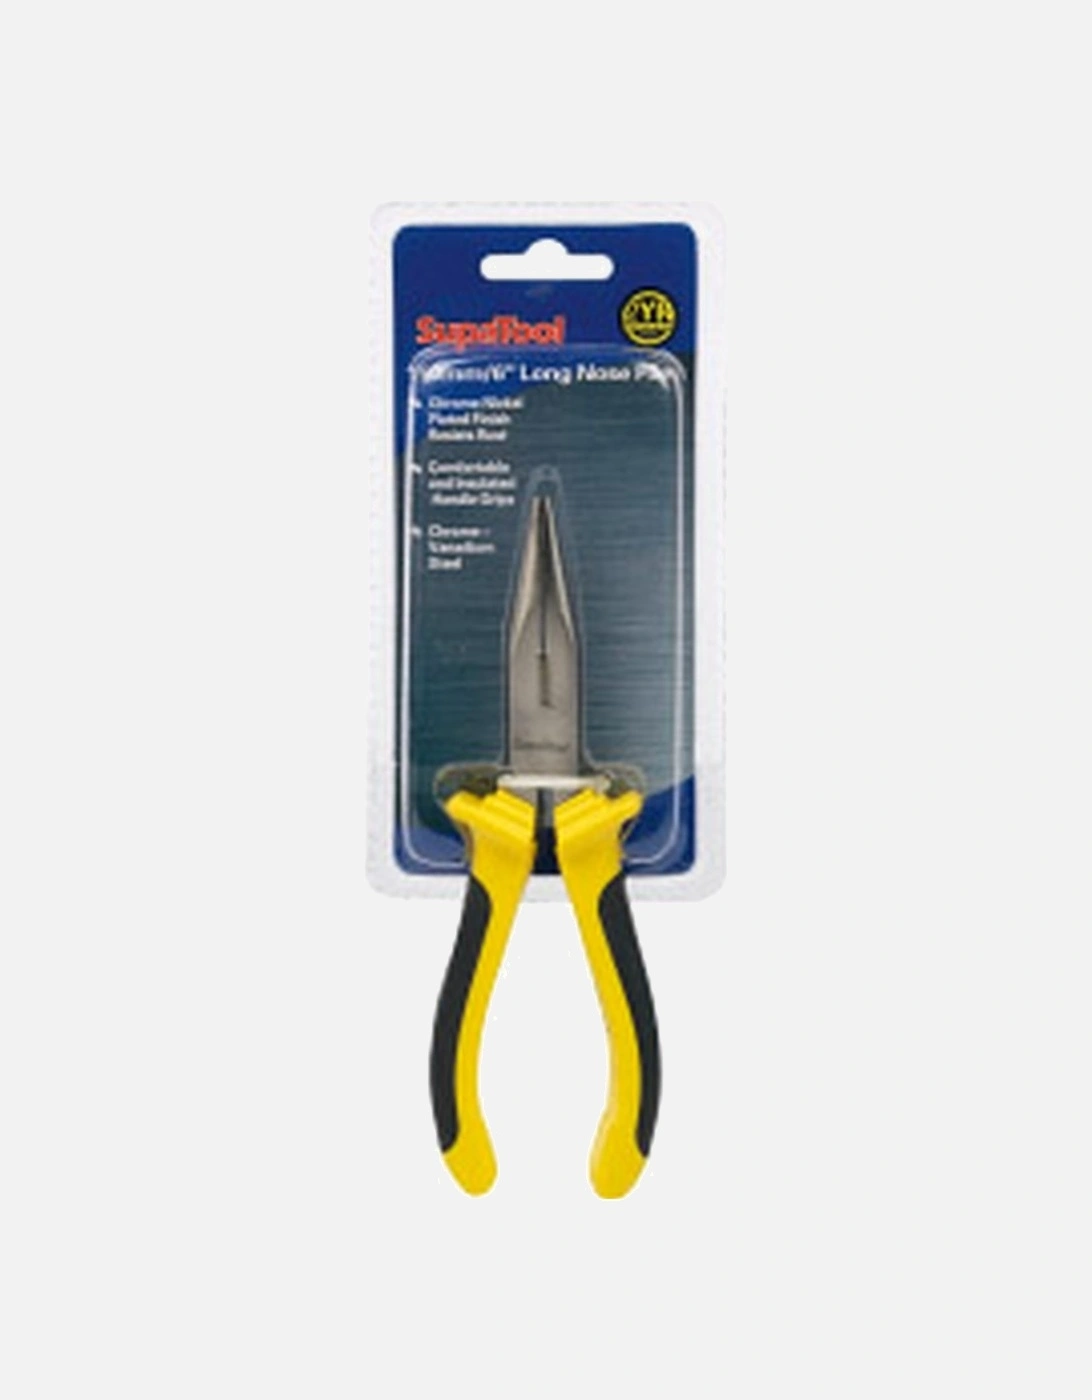 Deluxe Long Nose Plier, 2 of 1